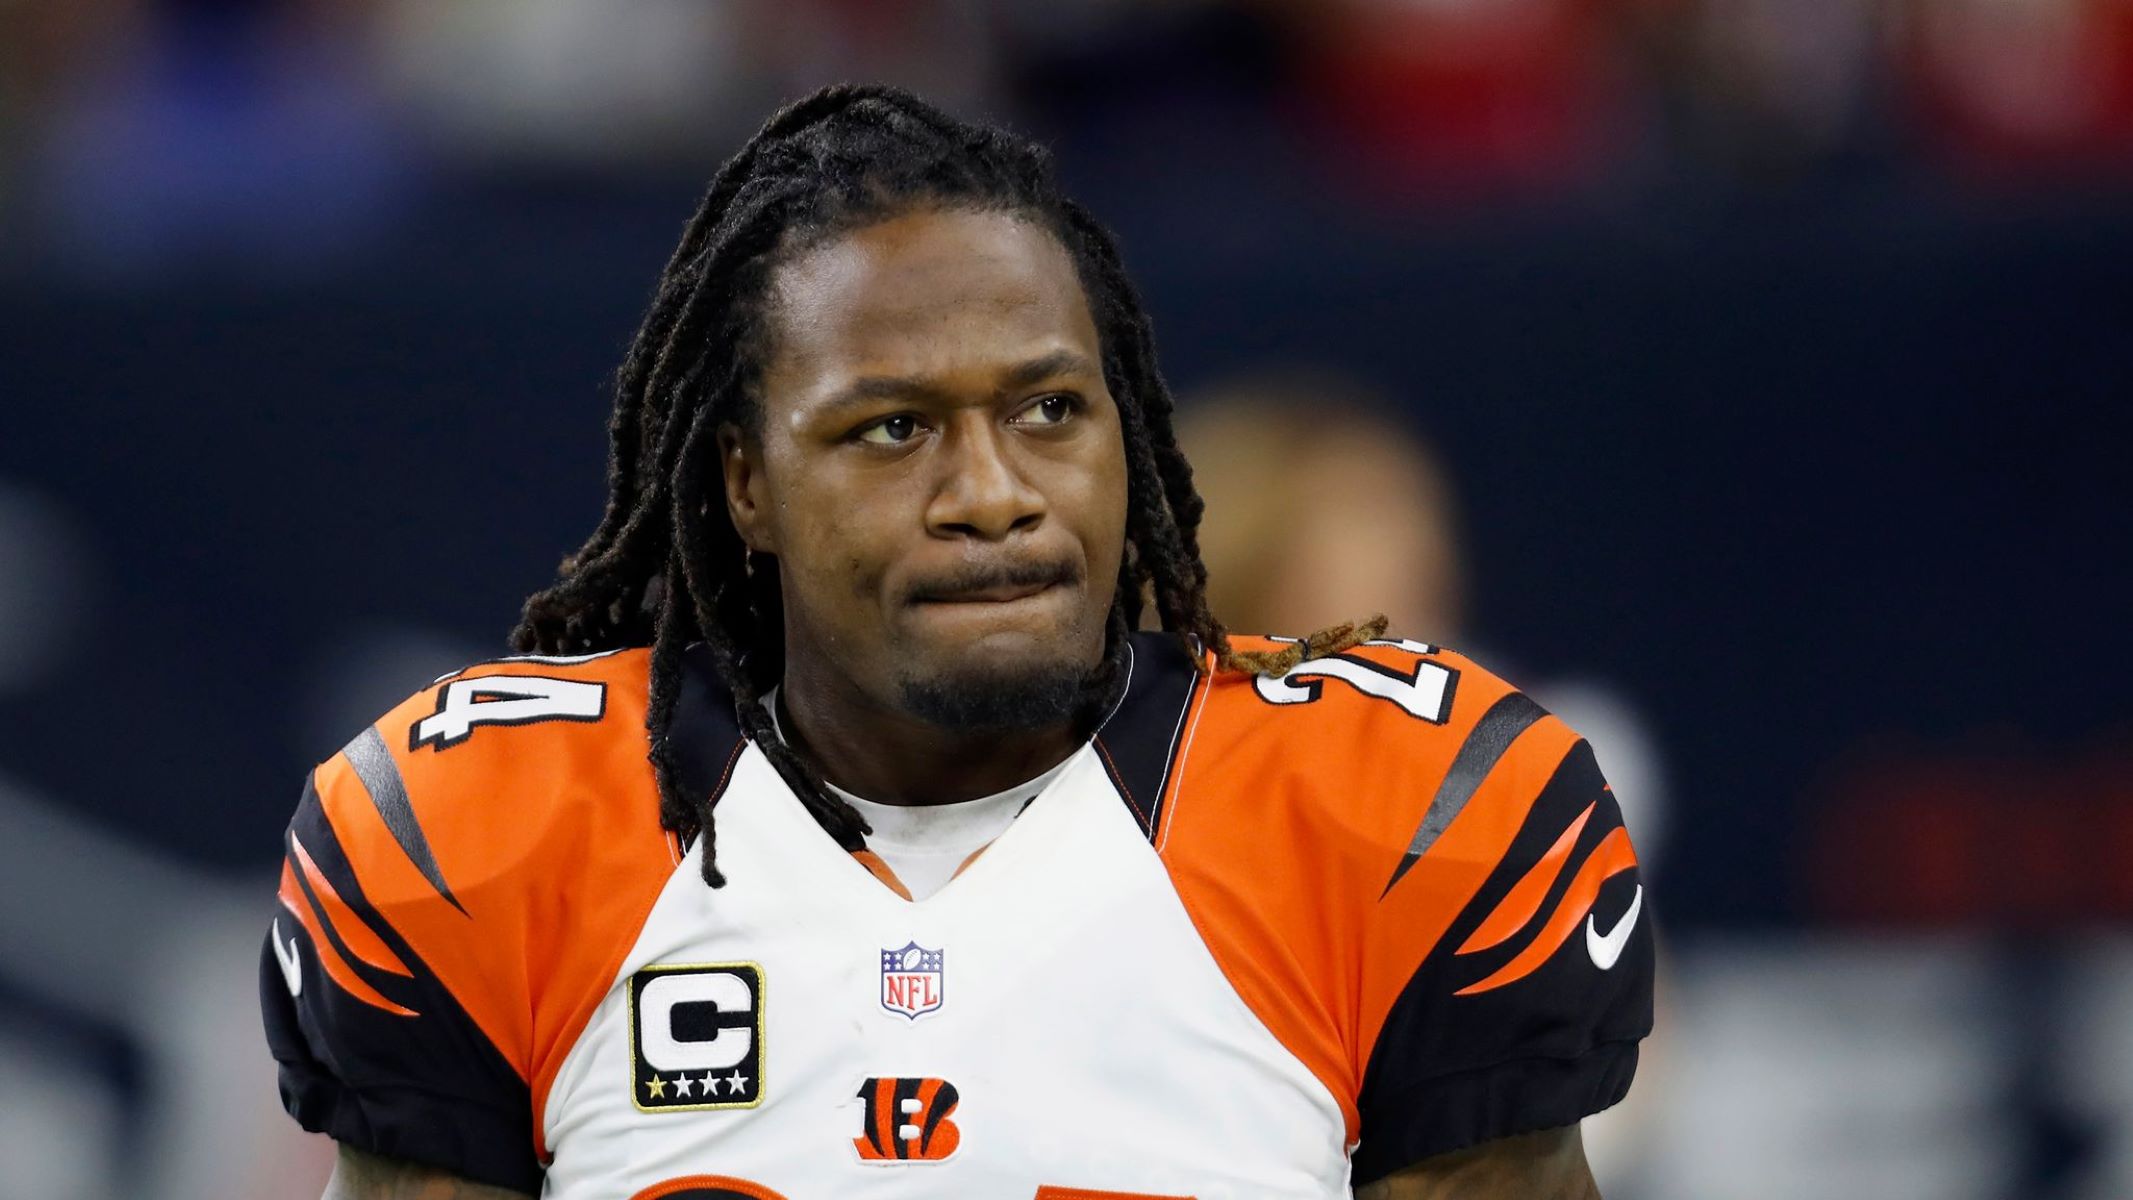 Pacman Jones Uses Arrest Video To Promote New Song: A Publicity Stunt?